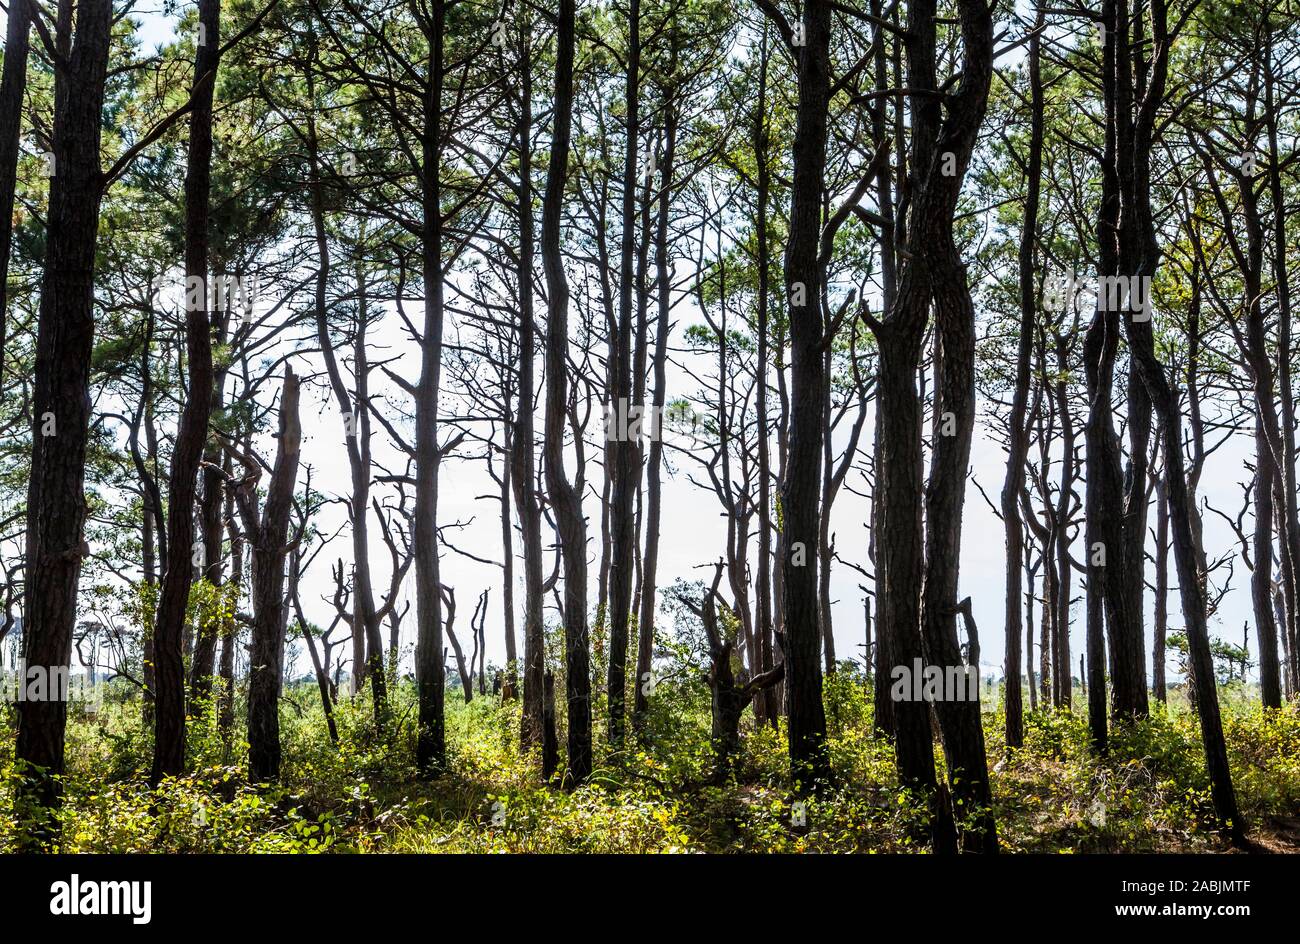 Looking at a forest of loblolly pines on a nature walk in Assateague Island National Seashore on the inner bay, Maryland, USA. Stock Photo